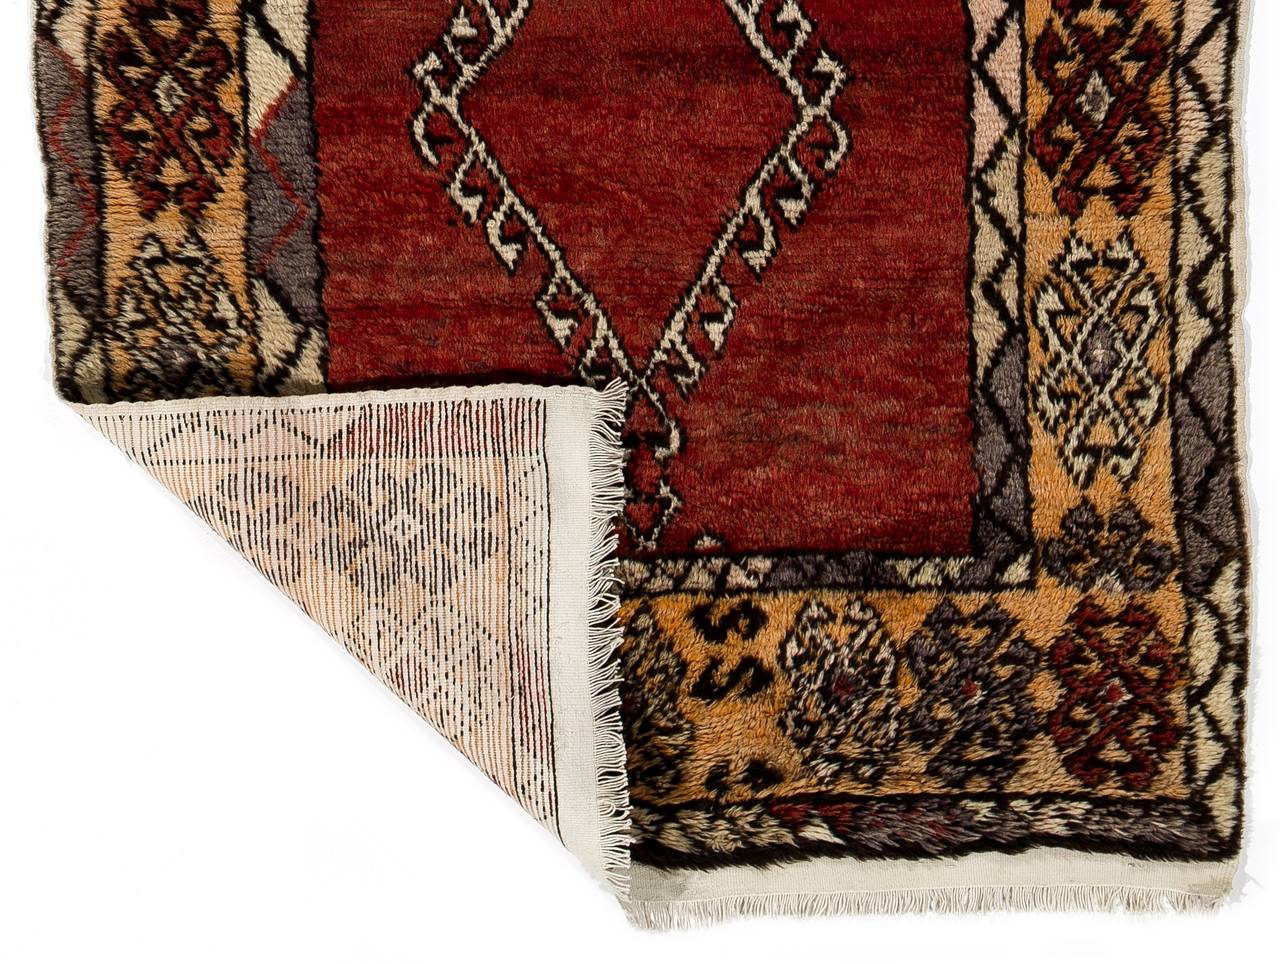 An archaic and unique antique hand-knotted rug produced by the nomads in Central Anatolia by the turn of the century for their daily use rather than re-sale purpose. Lustrous wool pile on cotton foundation and well preserved original condition.